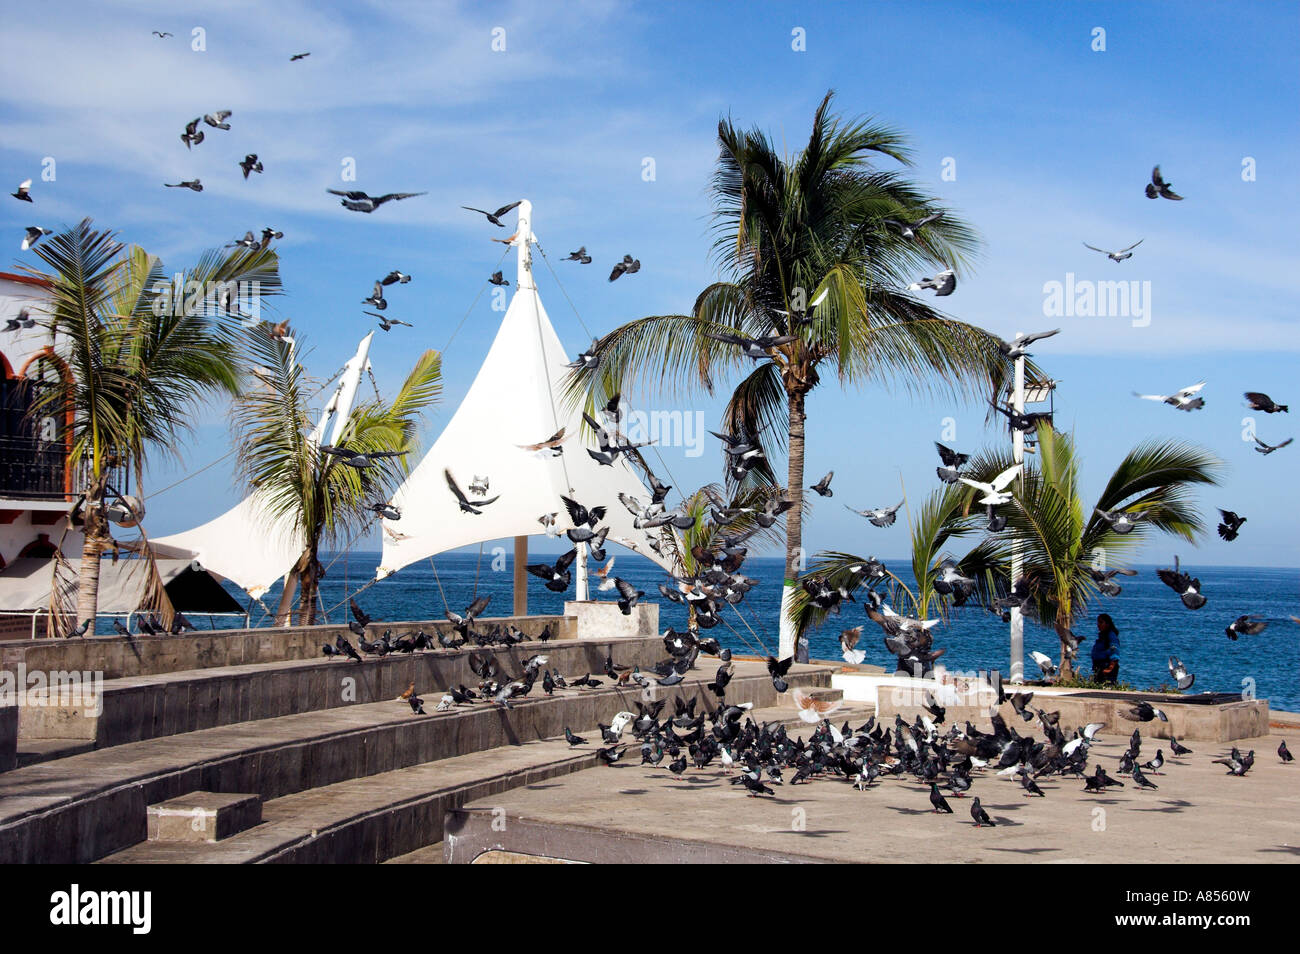 Flocks of pigeons gather on the Central Plaza in Puerto Vallarta Mexico Stock Photo